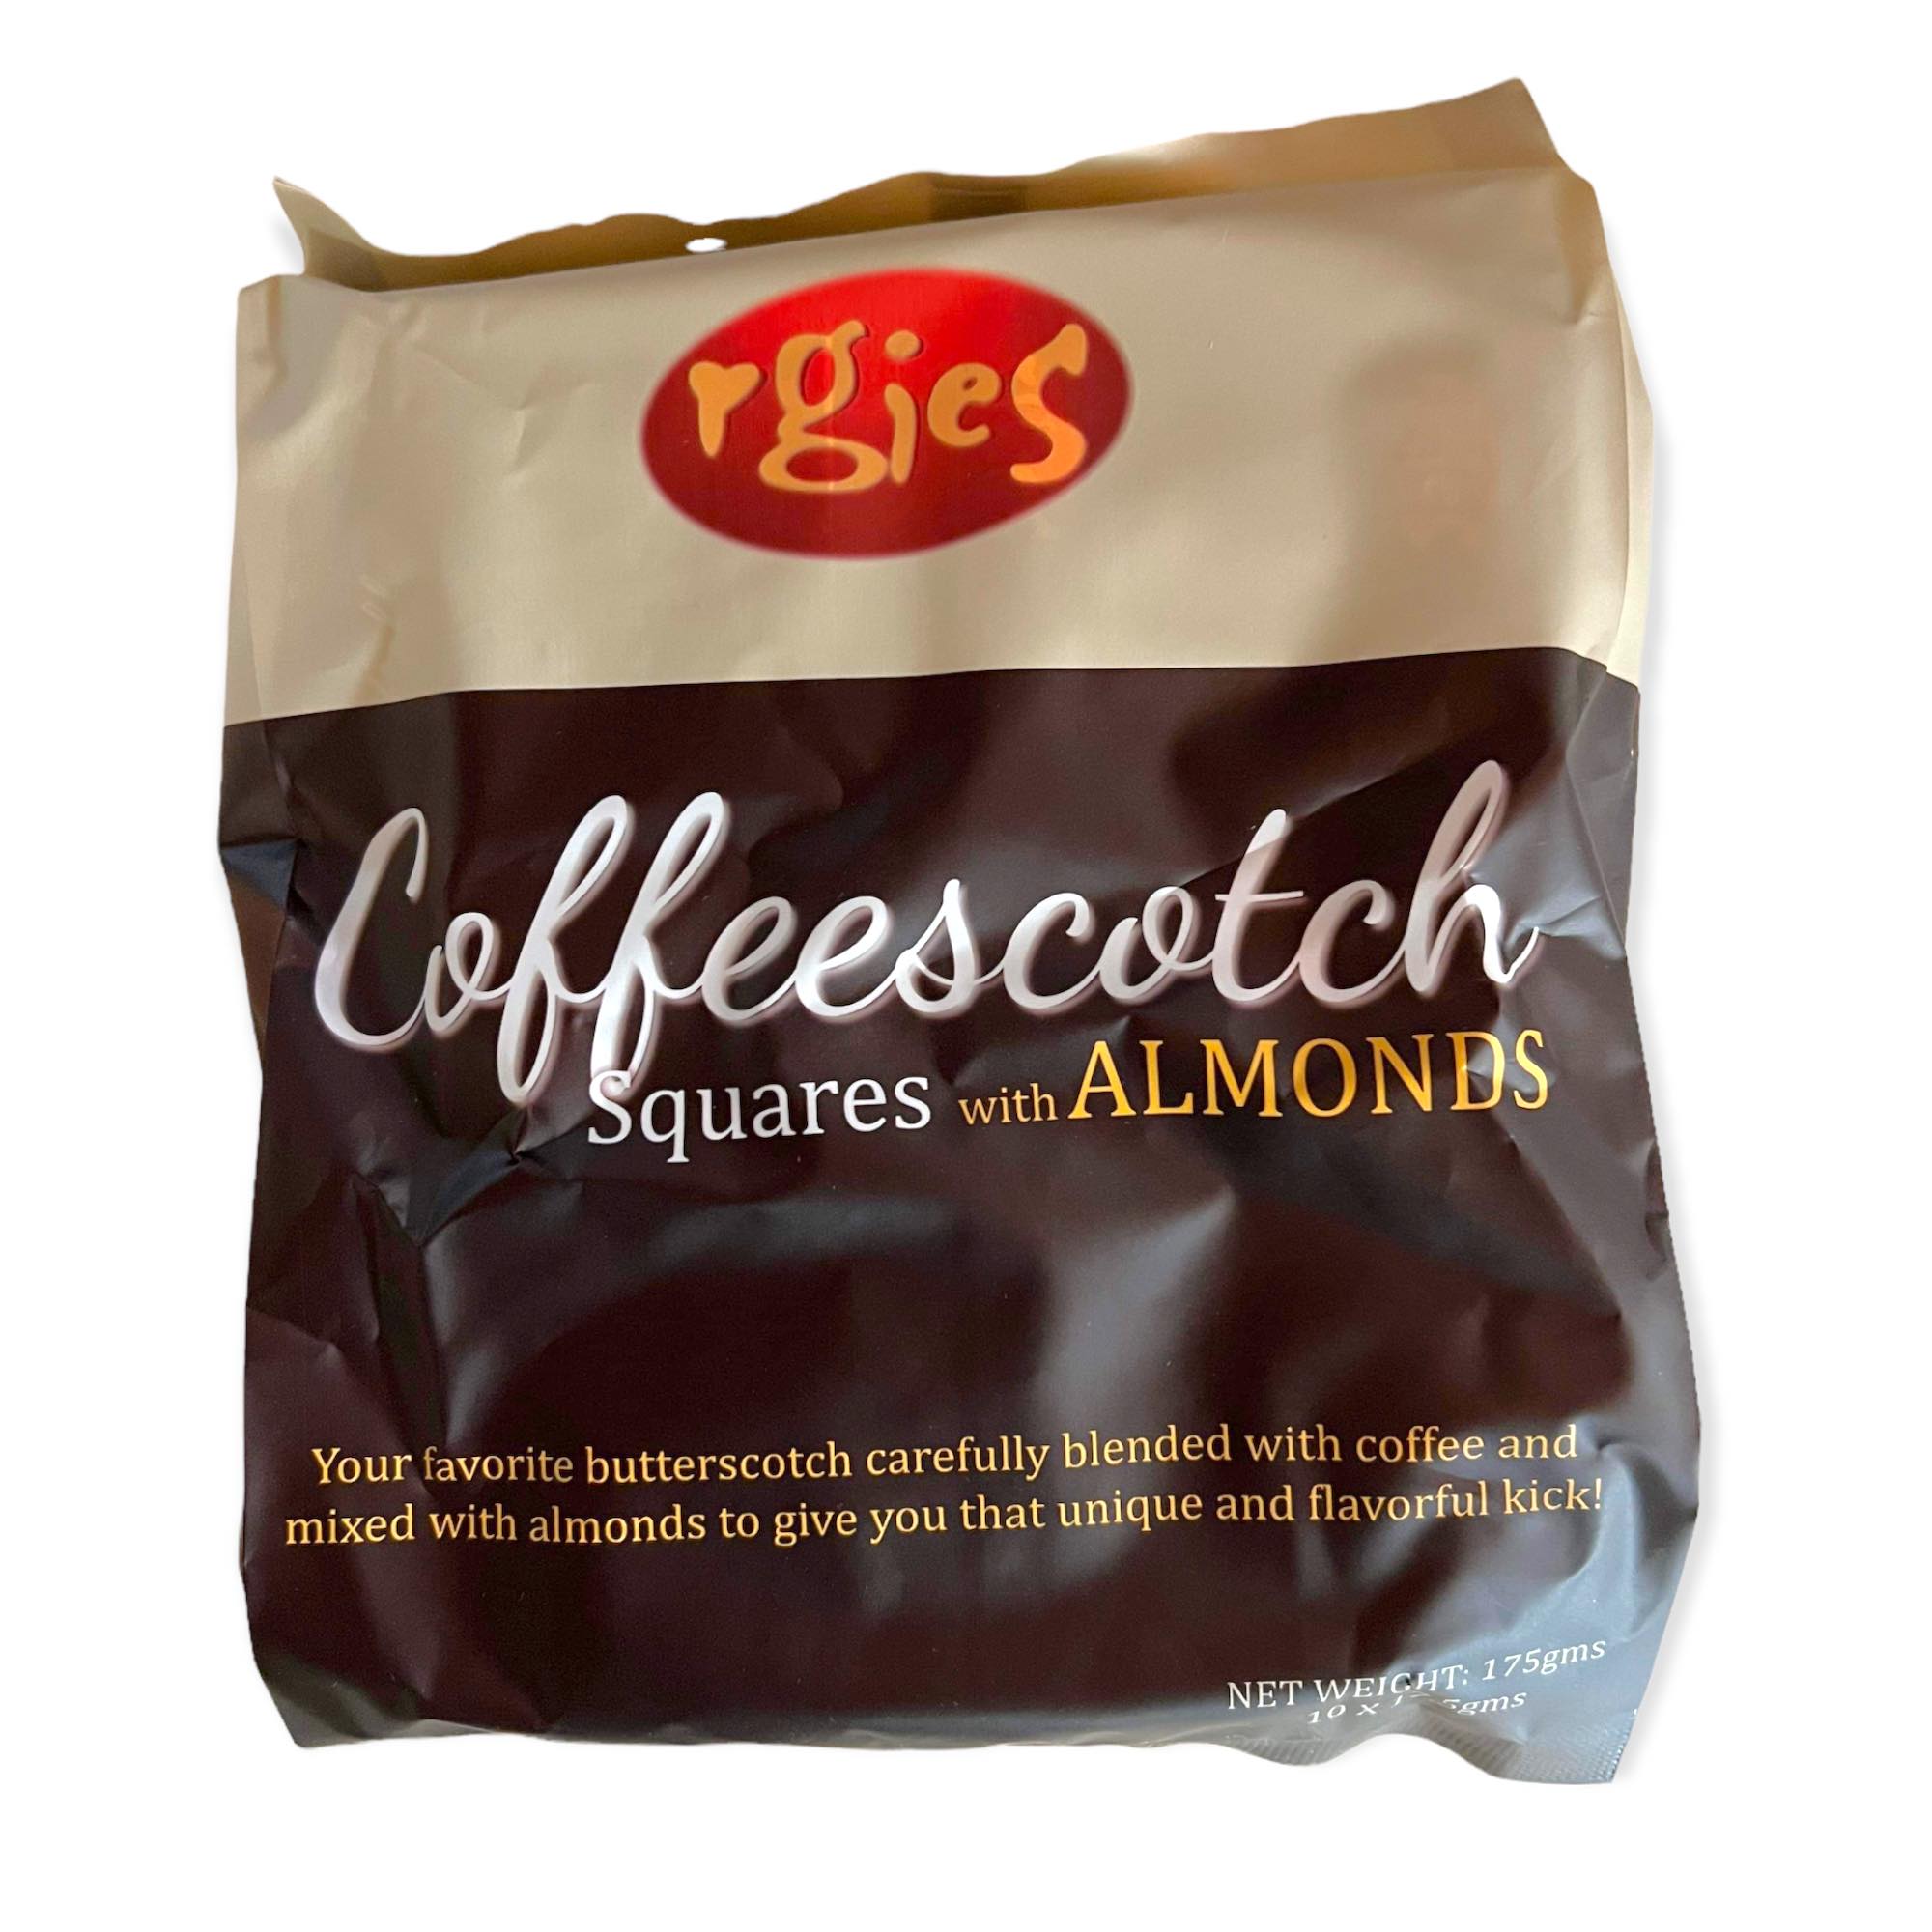 RGIES - Coffeescotch Squares with Almonds - 10 Pieces - 170 G